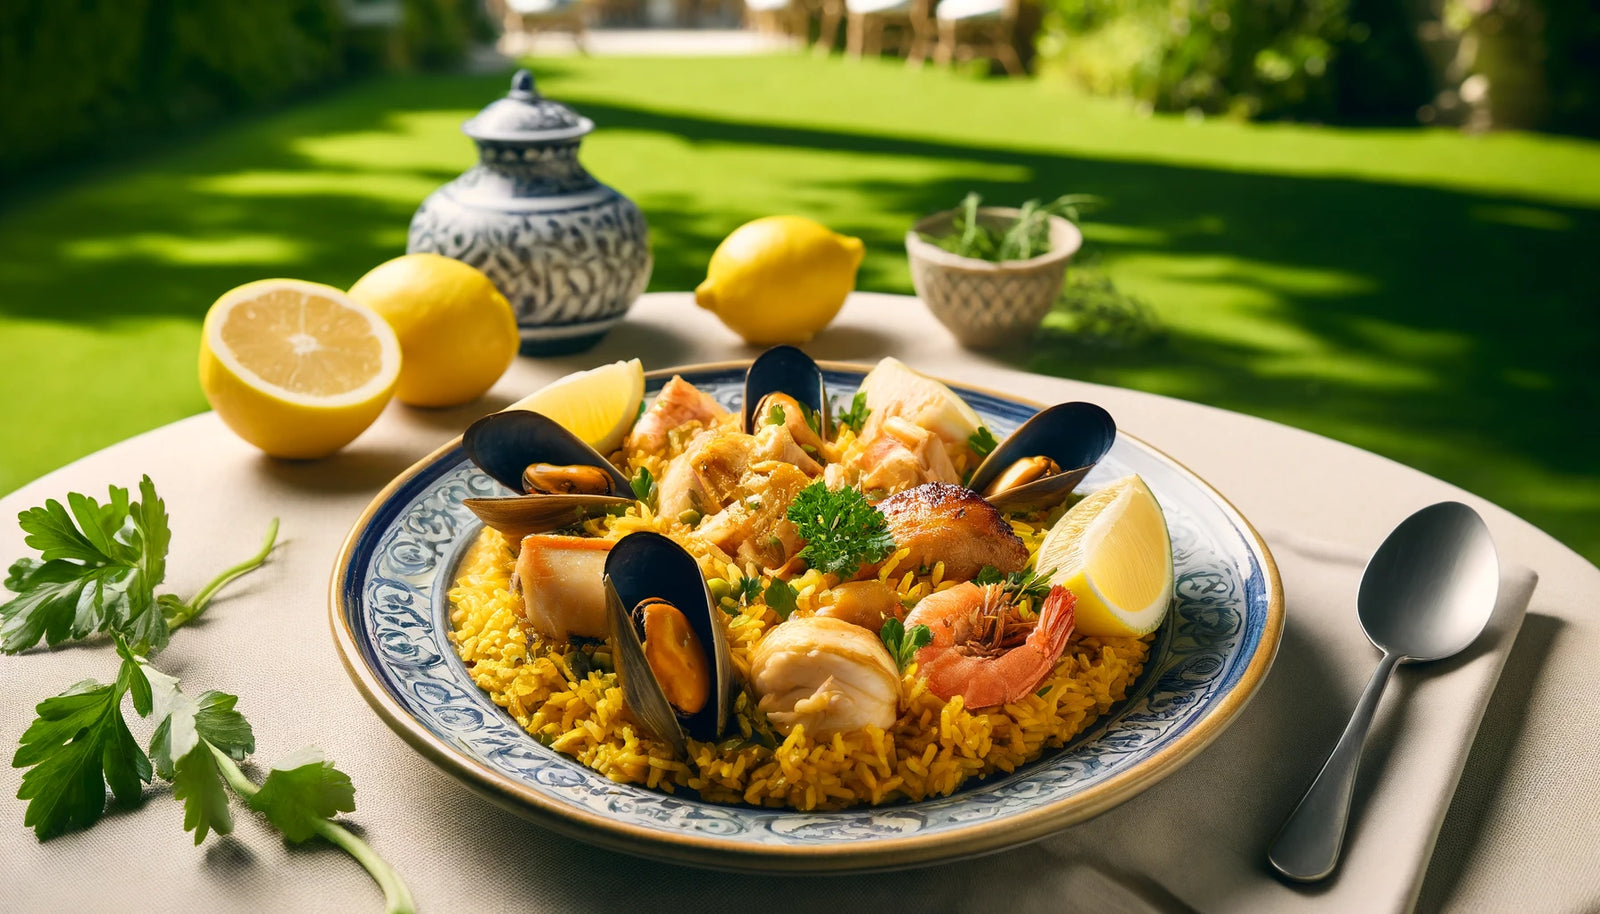 Beautifully Grilled Paella Valenciana with Saffron Rice and Seafood